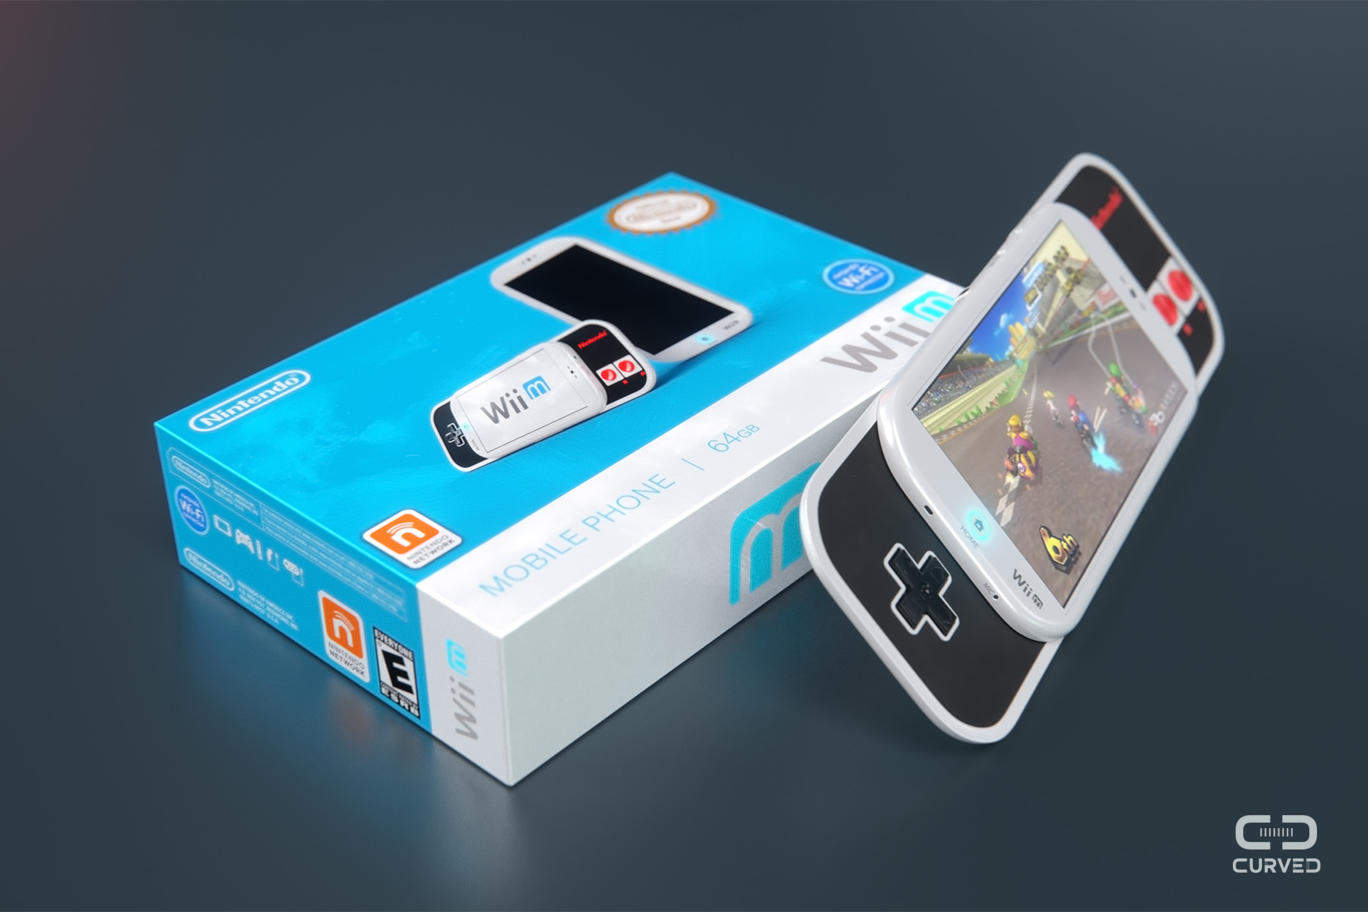 Would you buy this Nintendo phone concept?